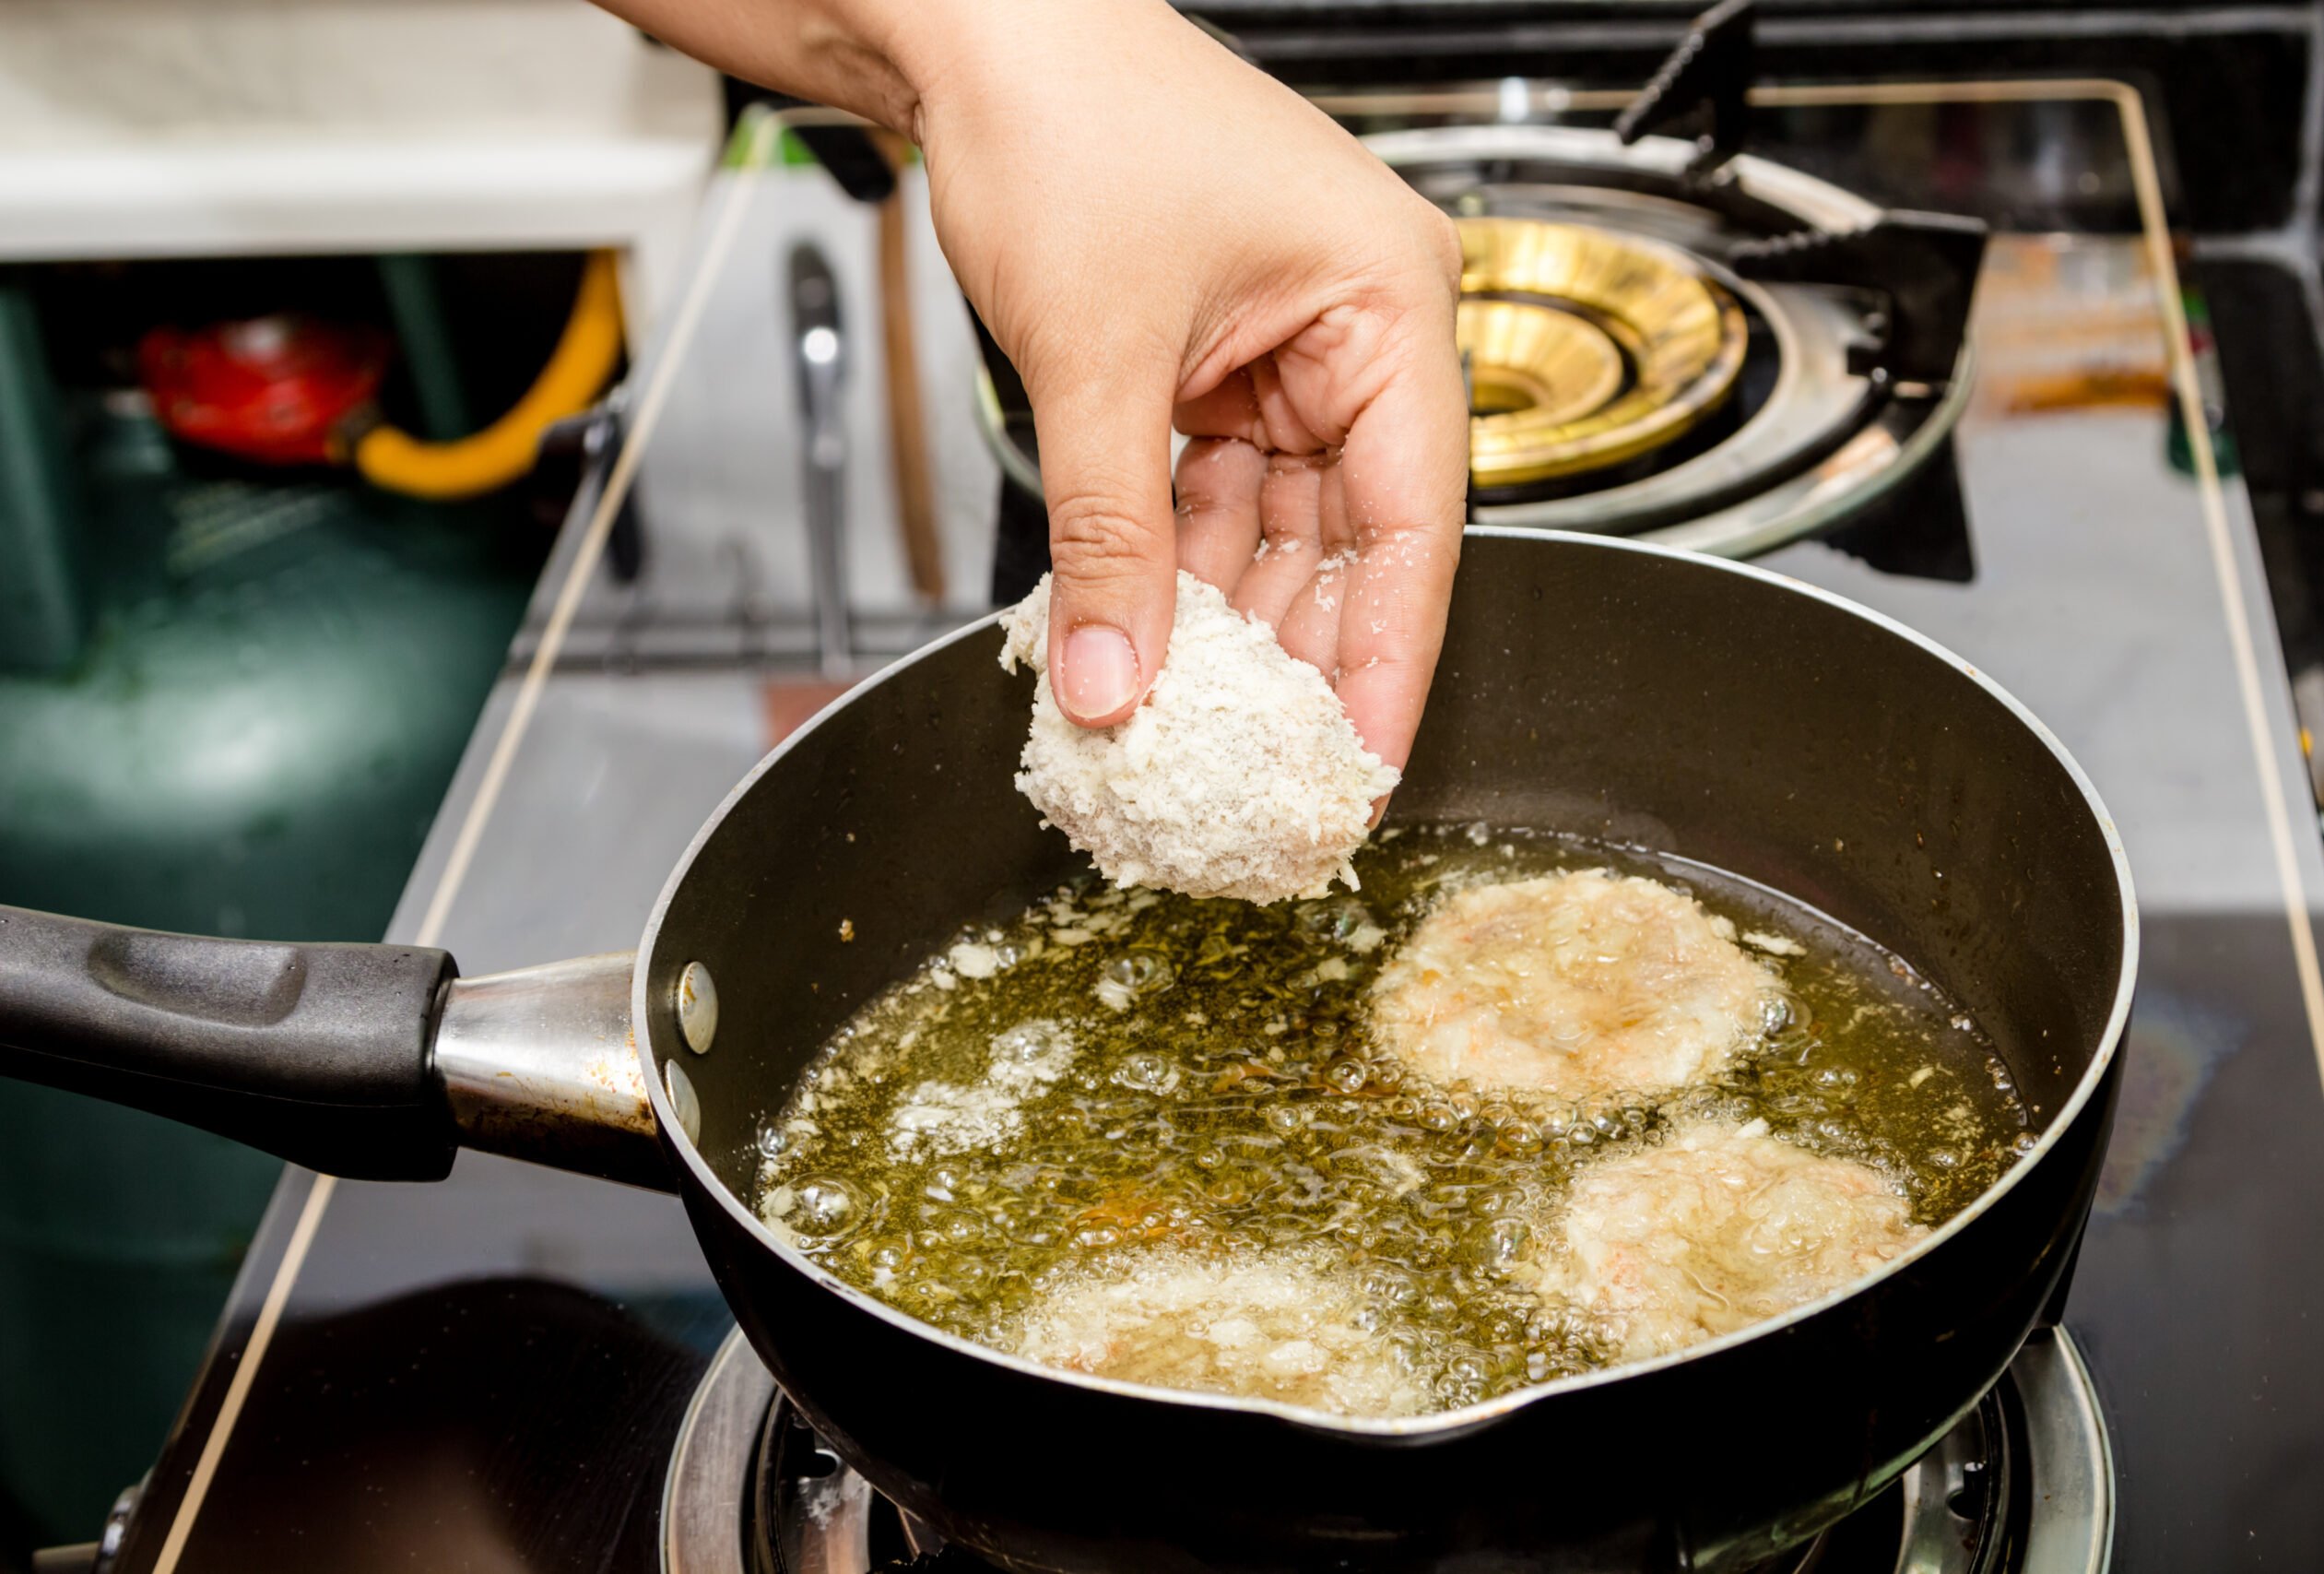 How to Use Your Ears To Check Oil Temperature for Deep Frying